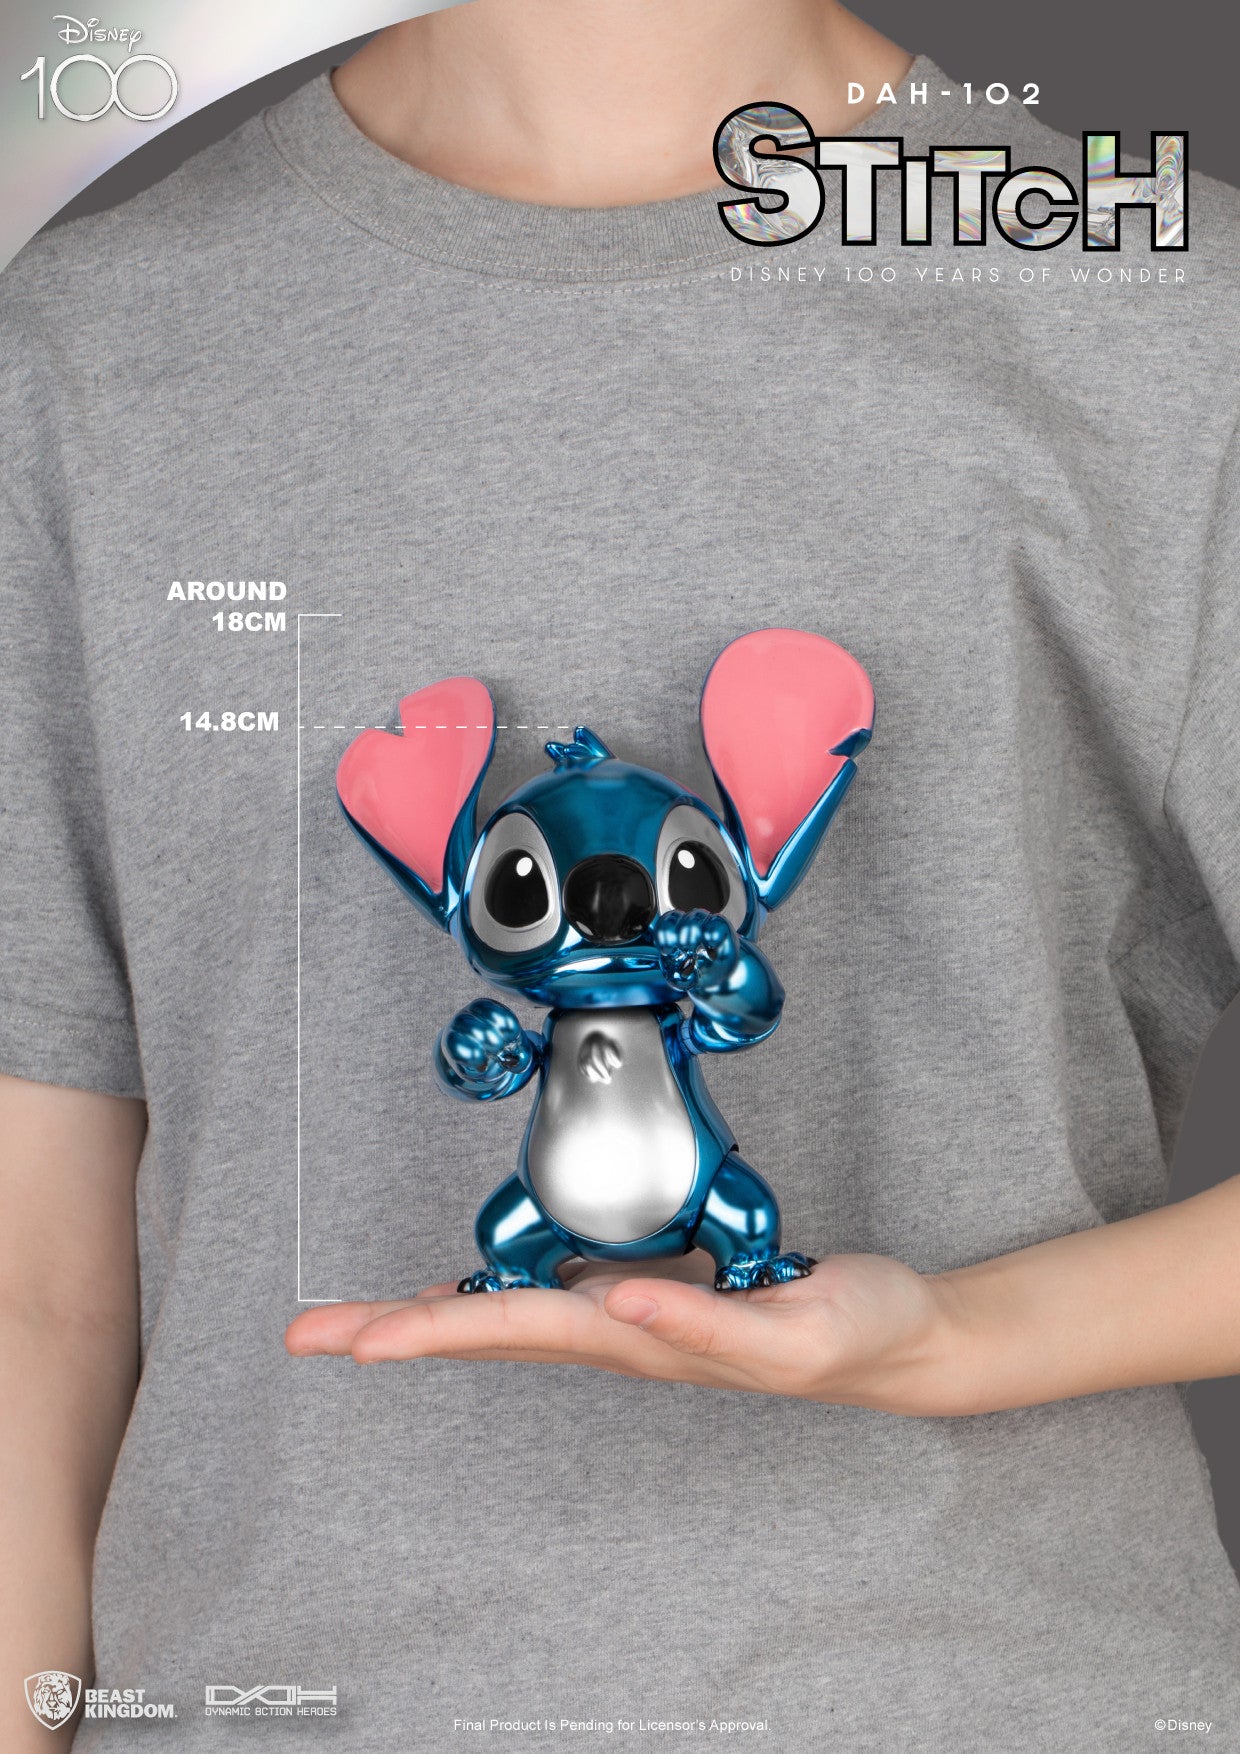 Disney 100 Years of Wonder: DYNAMIC ACTION HEROES - Stitch